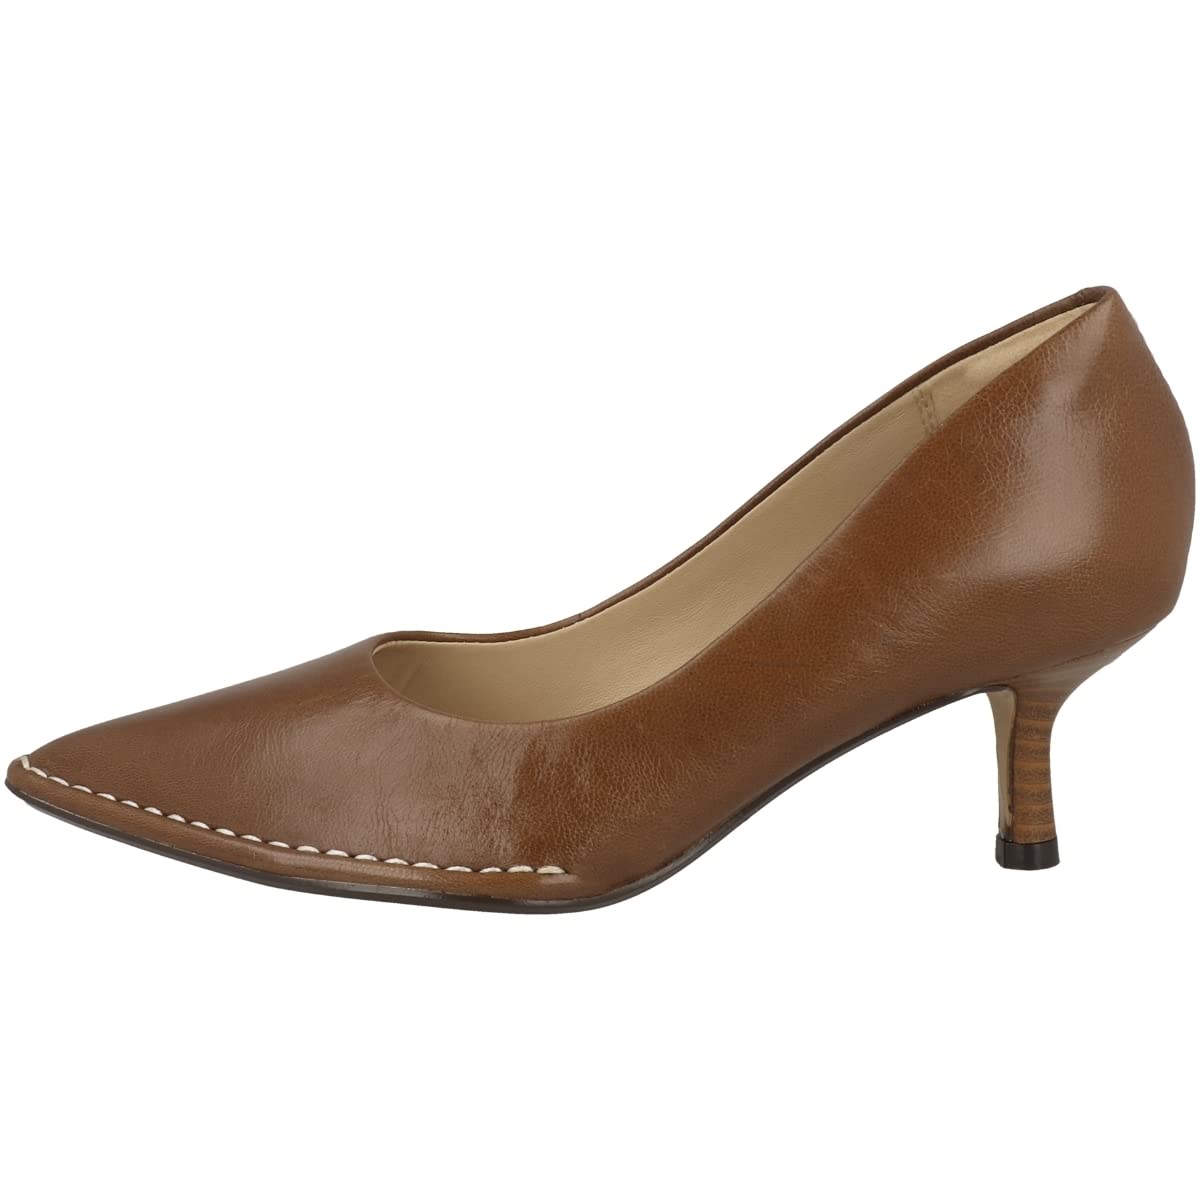 Clarks Women's Tan Leather Court Shoes 